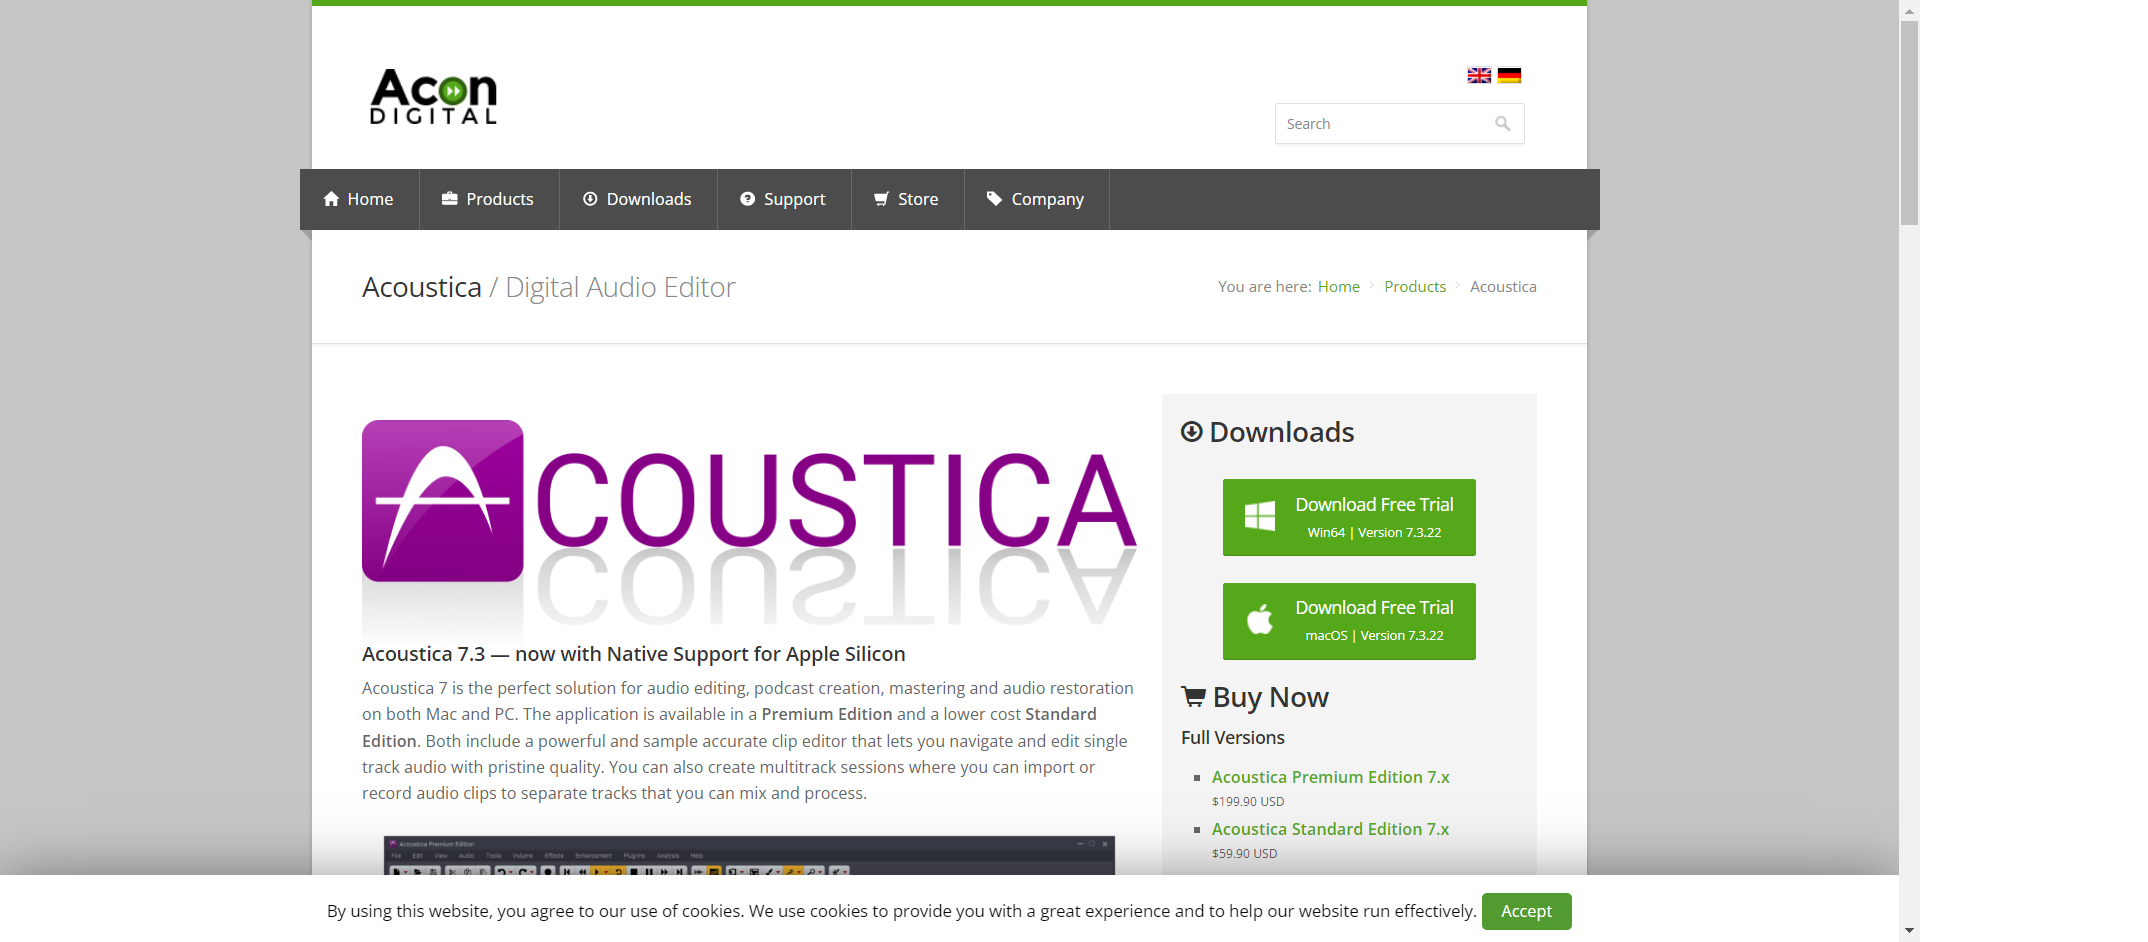 Acoustica main page